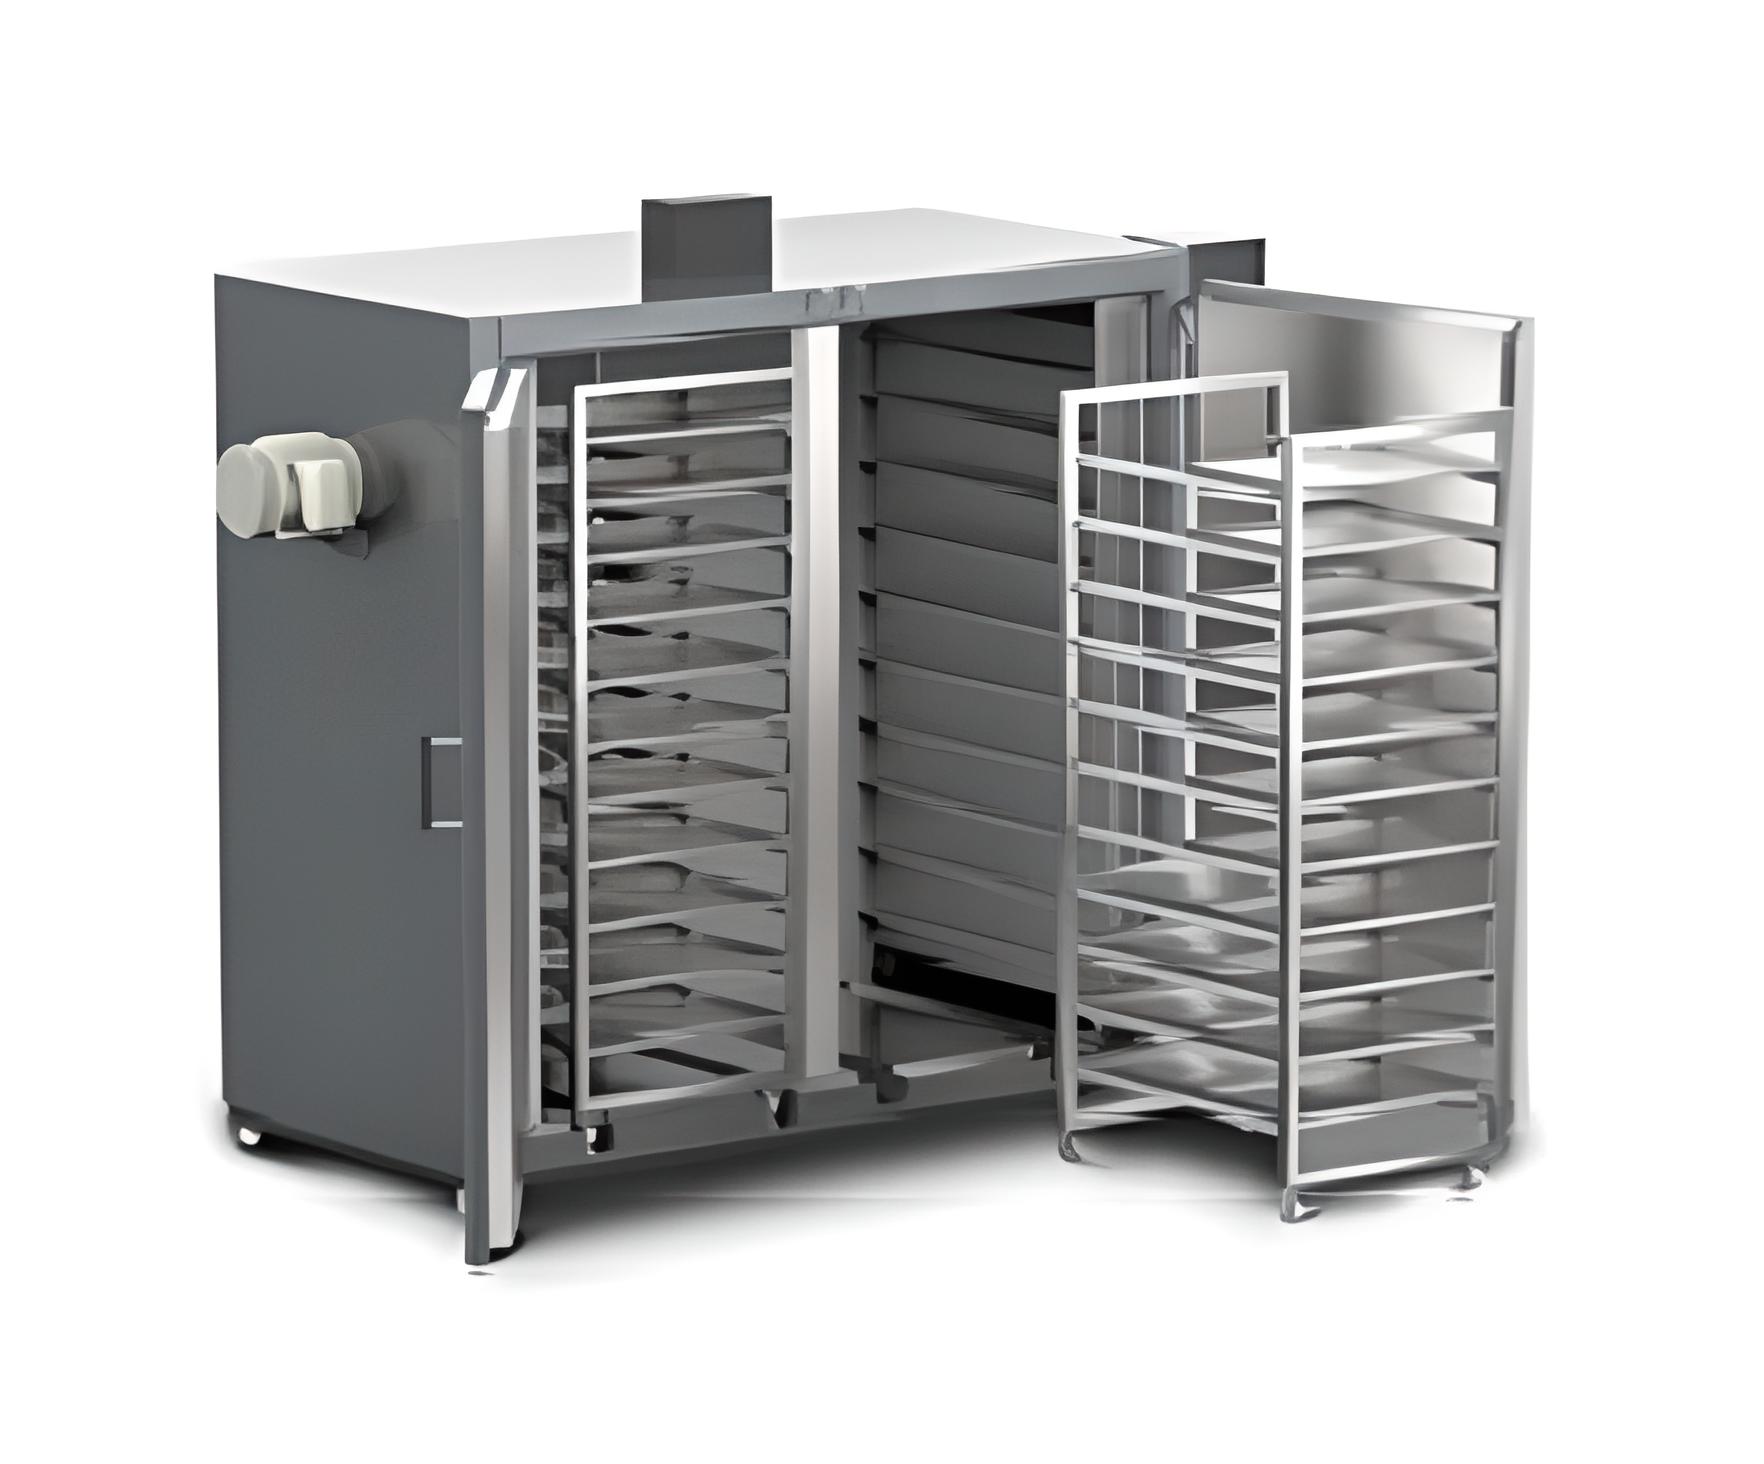 Air Tray Dryer (ATD)